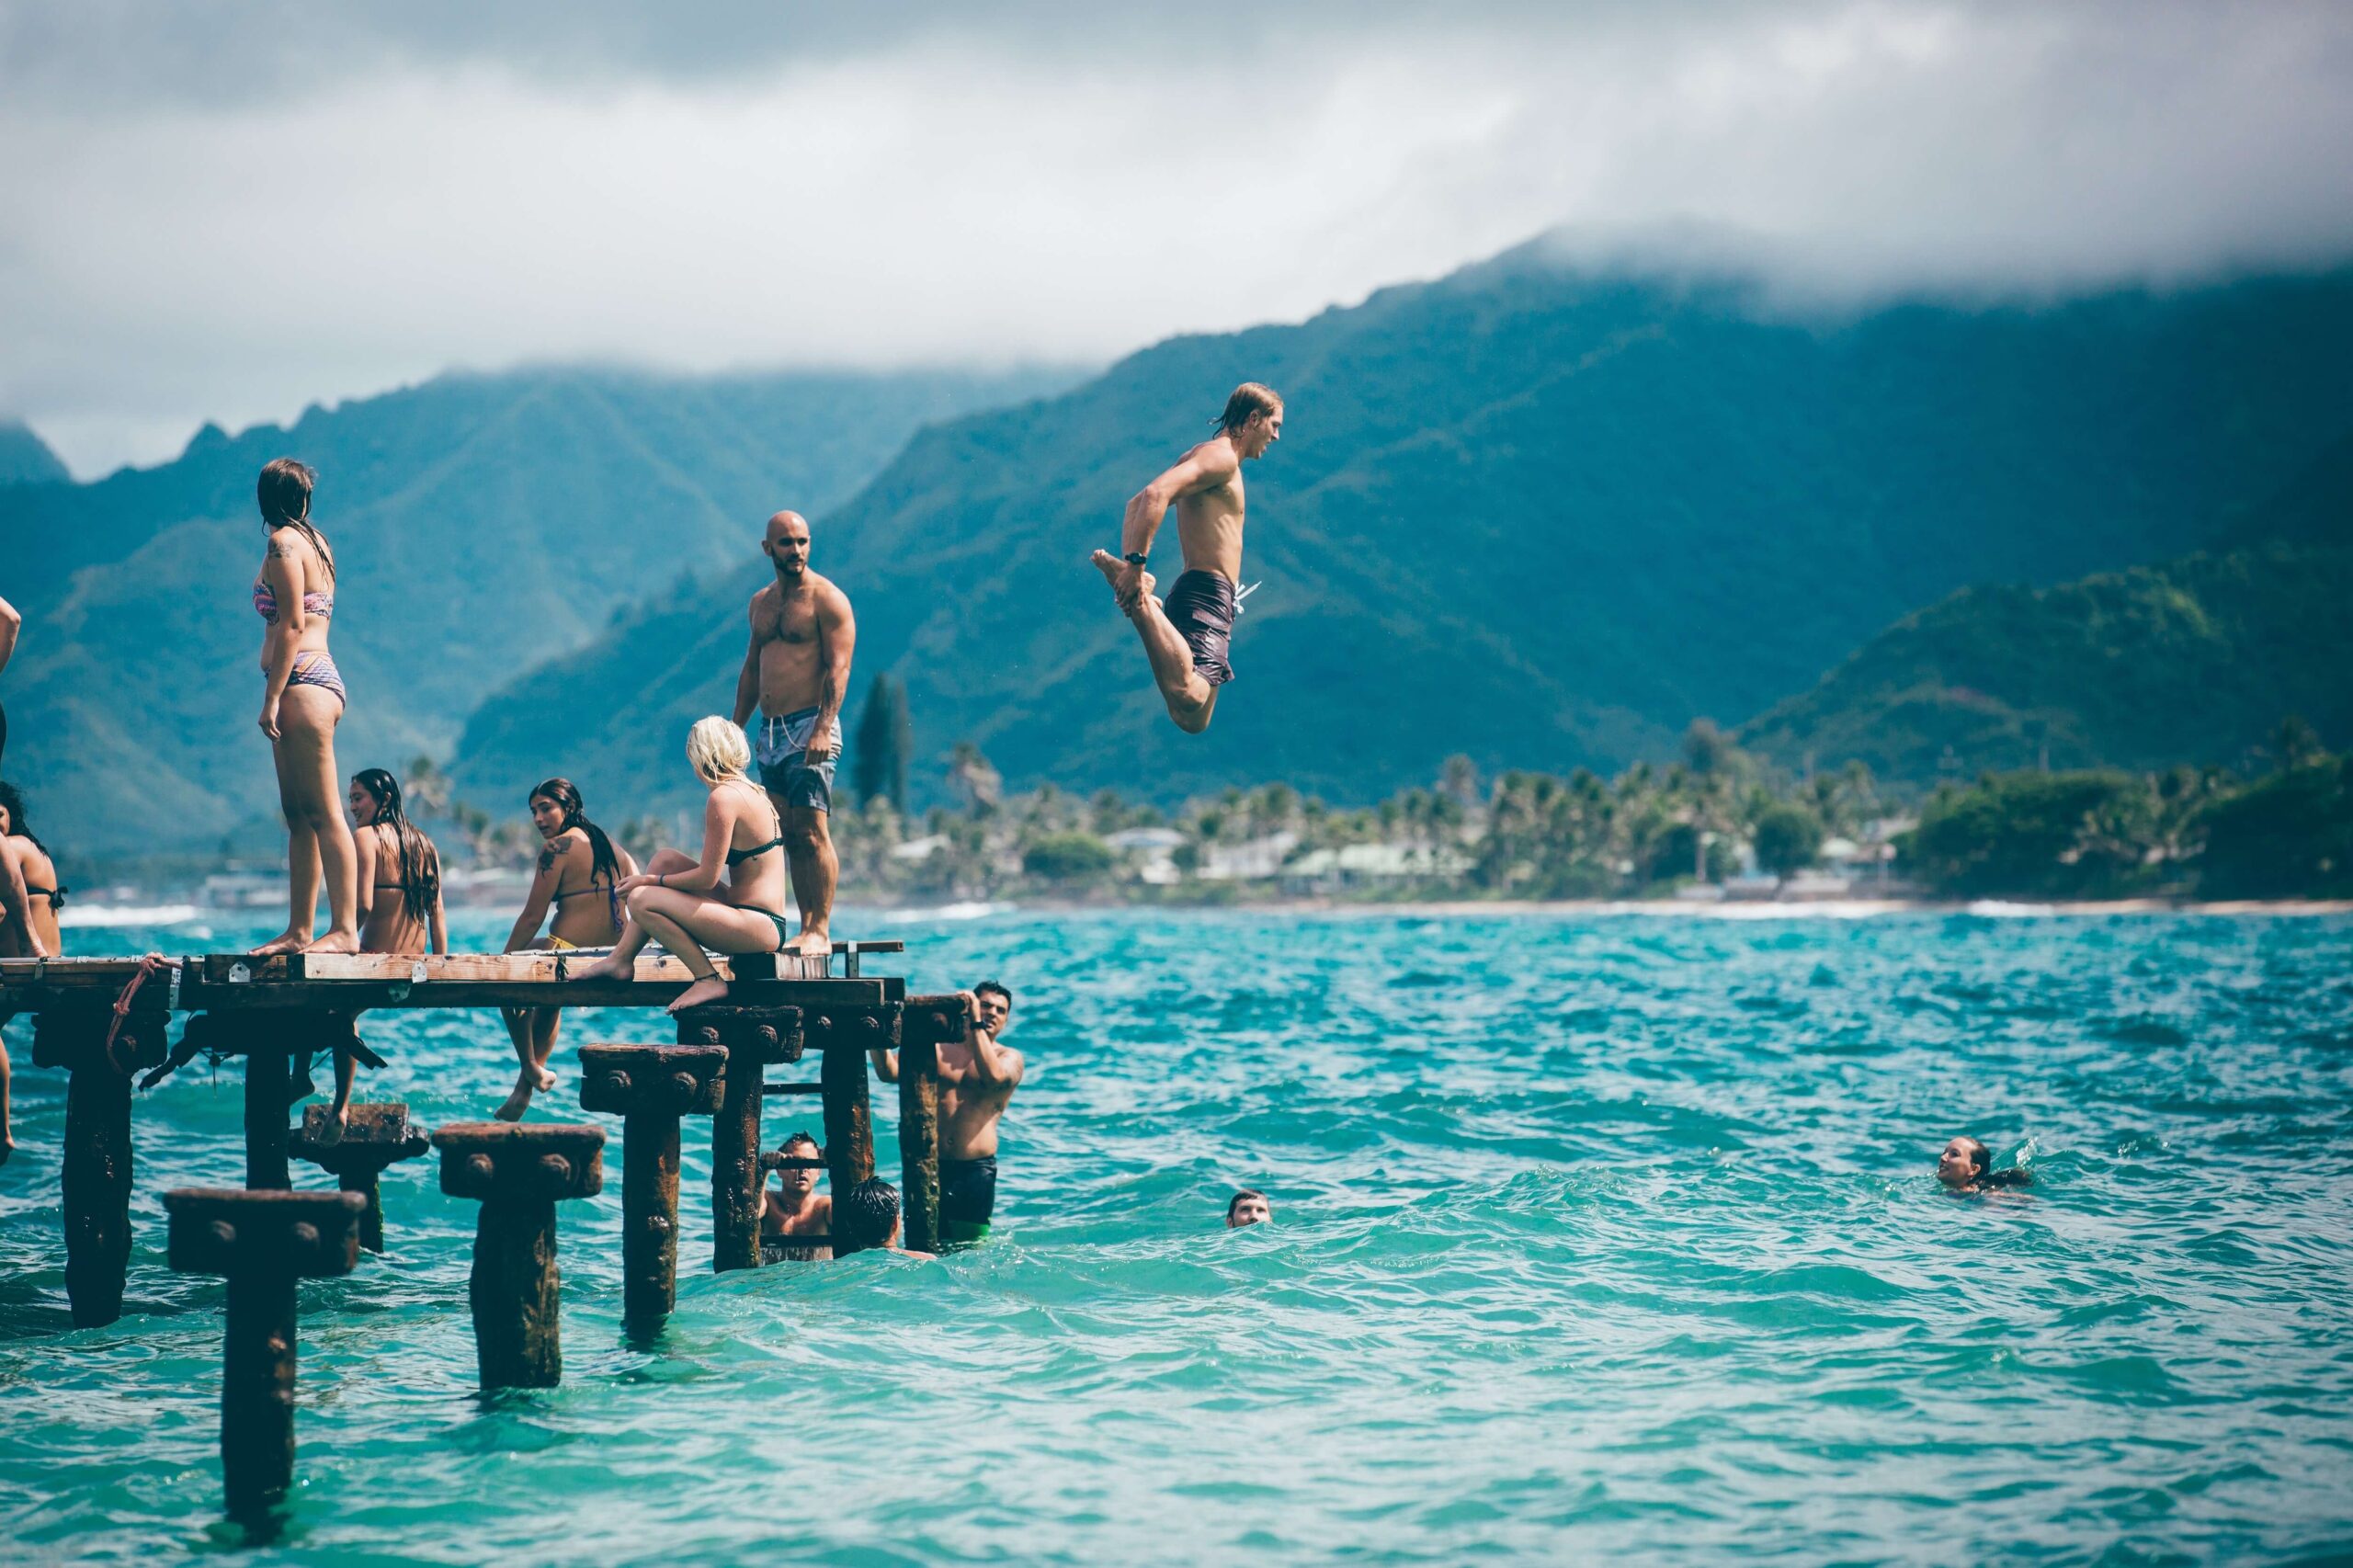 People jumping in the water